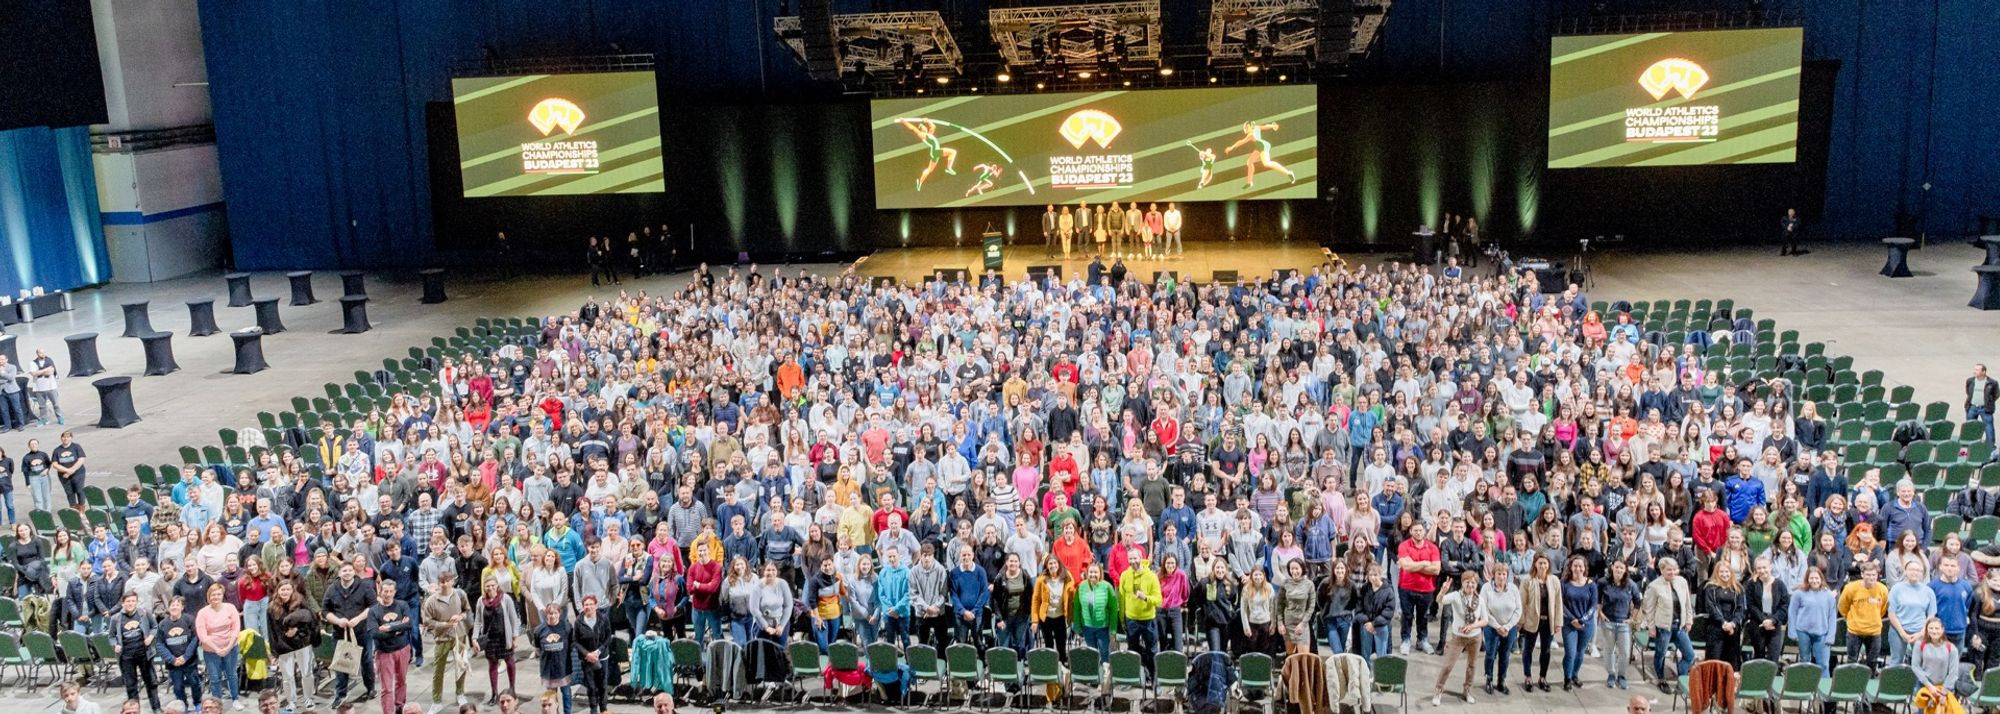 Around 2,000 of the volunteers attended a training day in Budapest in April 2023 ©Budapest 2023